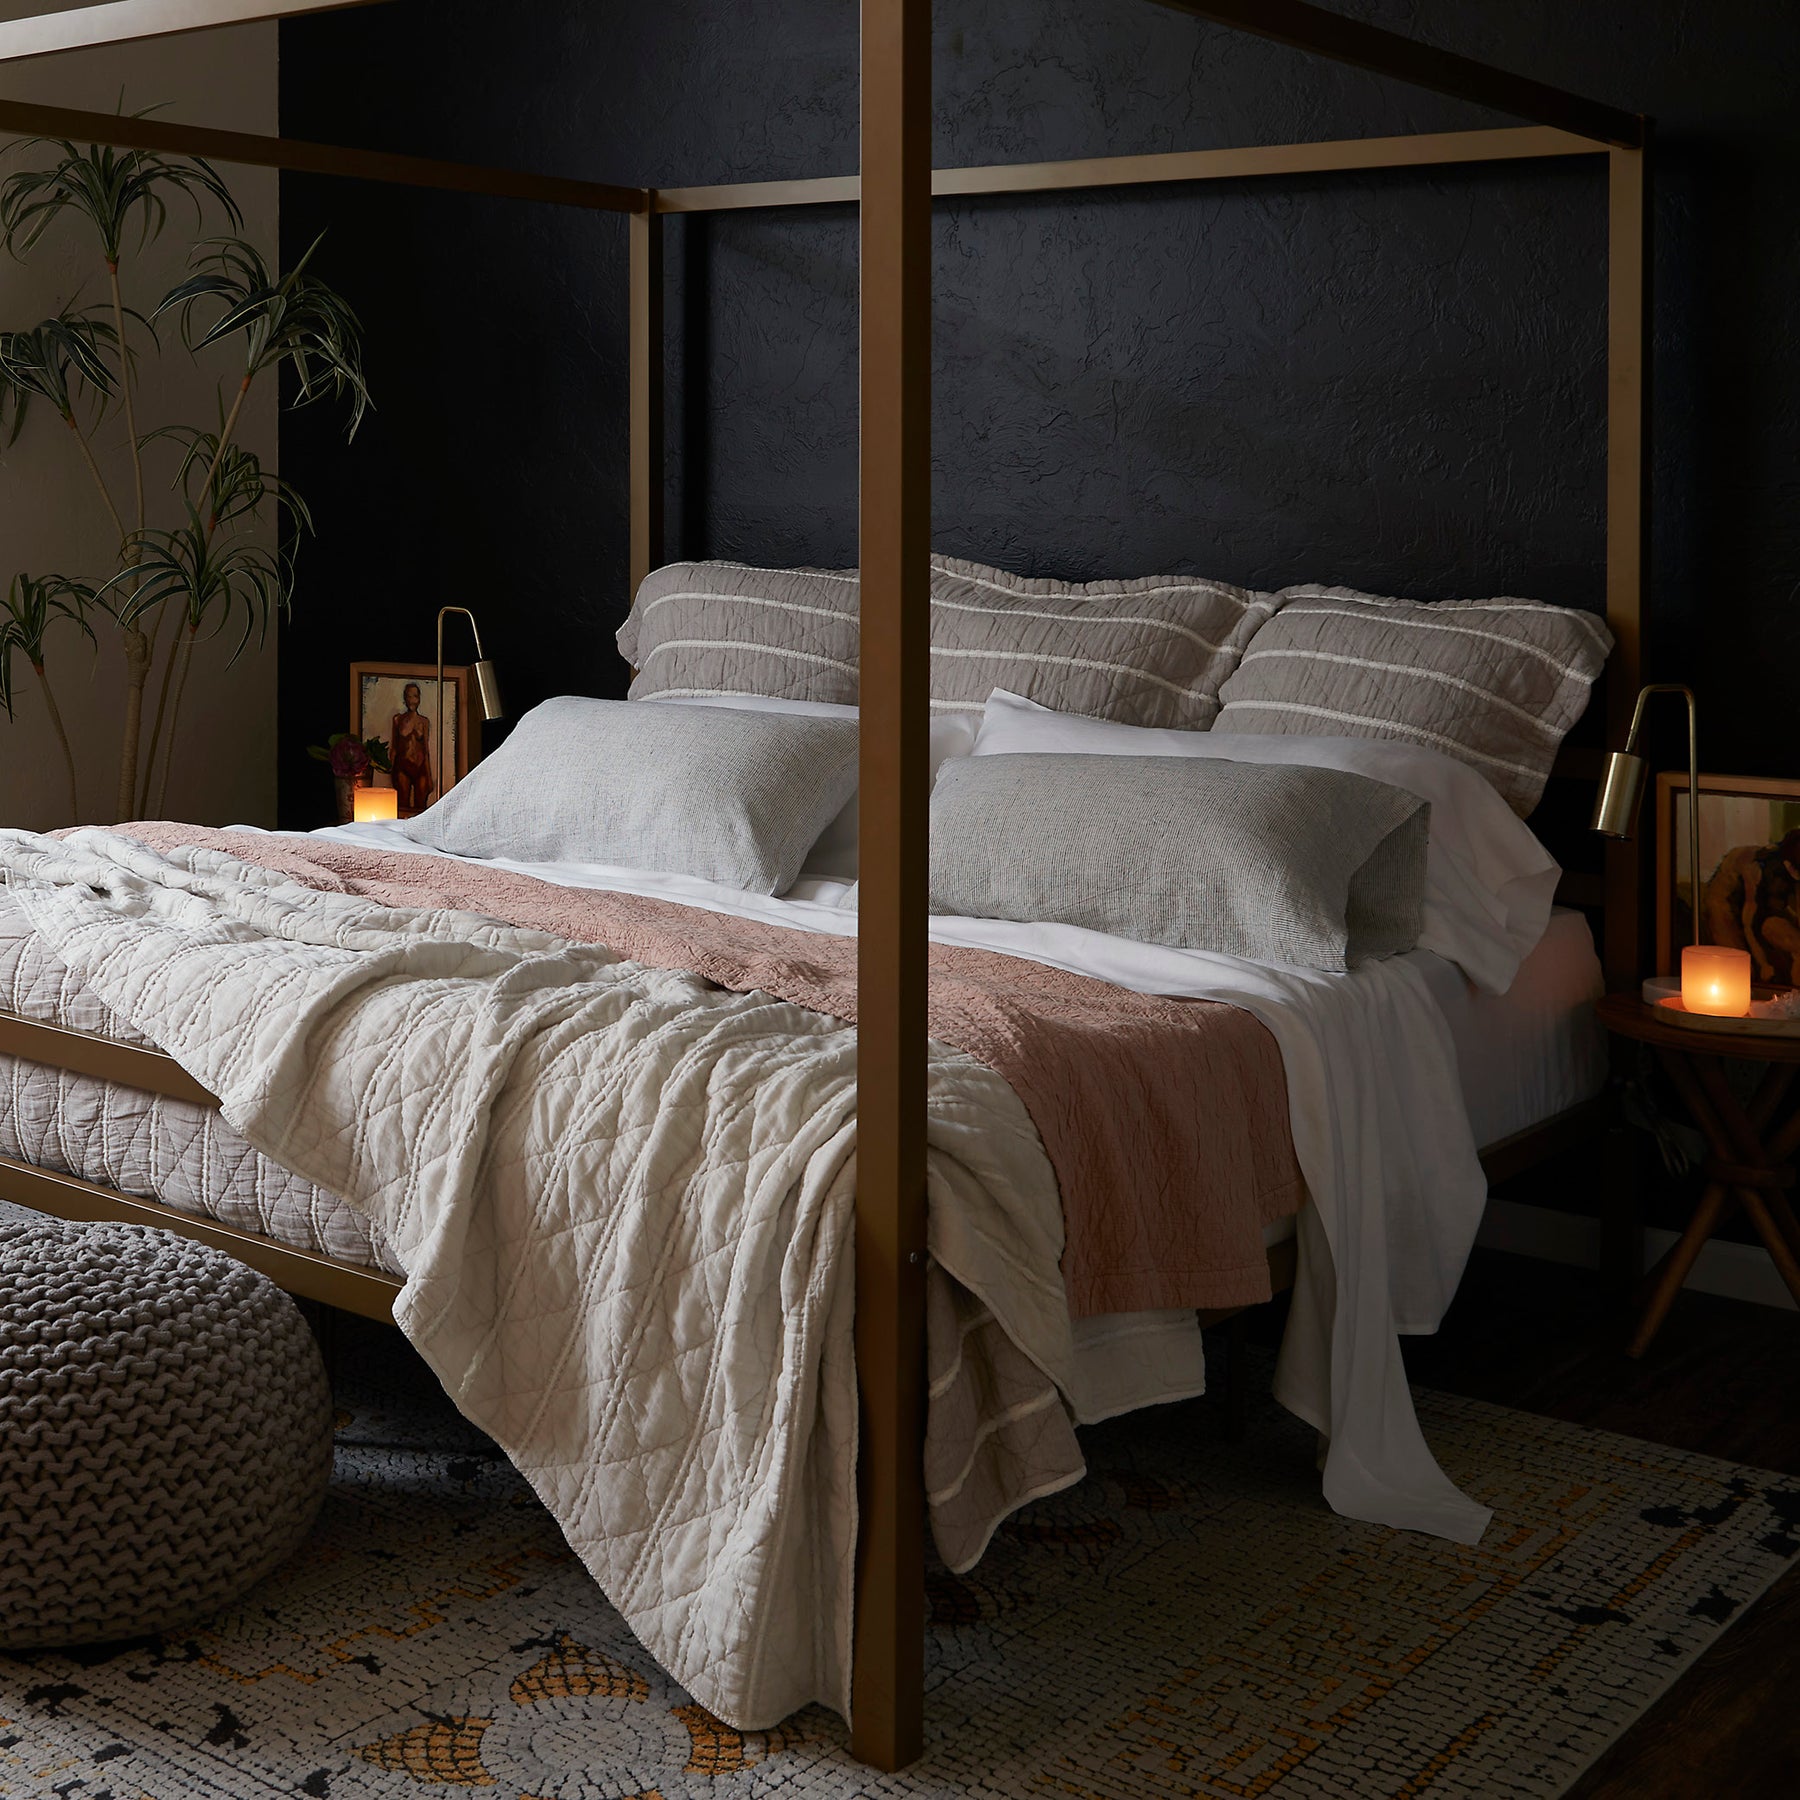 Image of a made bed with a dark background. The bed showcases pillows of various sizes and layered bedding. Items on the bed include: Kapok Pillows, White Blended Linen Sheets, Pinstripe Relaxed Hemp Pillowcases, a Pink Sandstone Wave Coverlet, and a reversible gray and white striped Heritage Quilt.